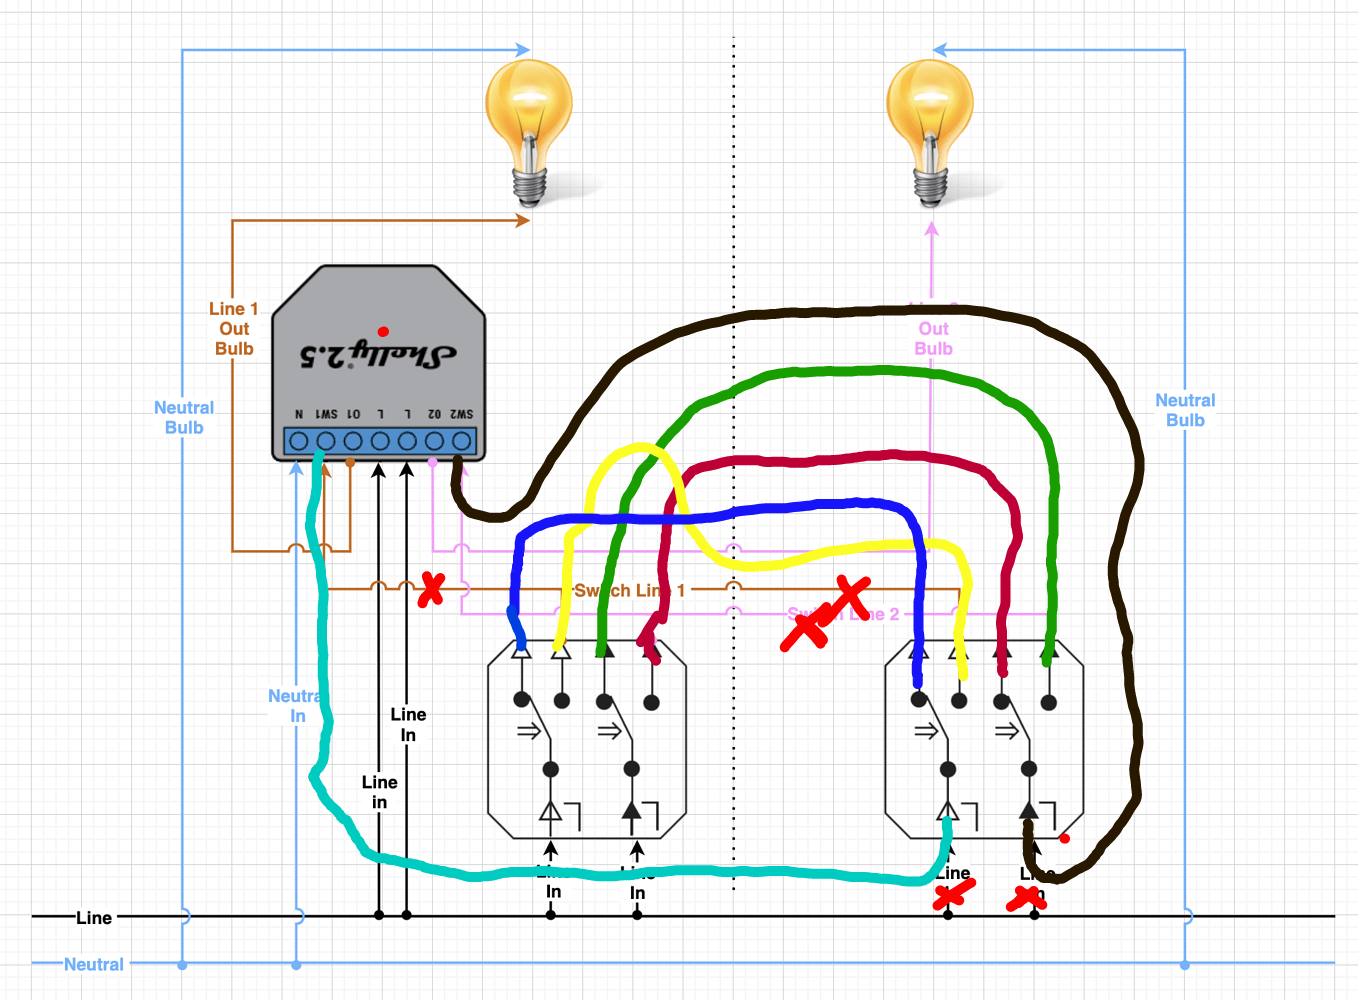 Solved] Shelly Wiring Help (Plus2 PM with Momentary Switch